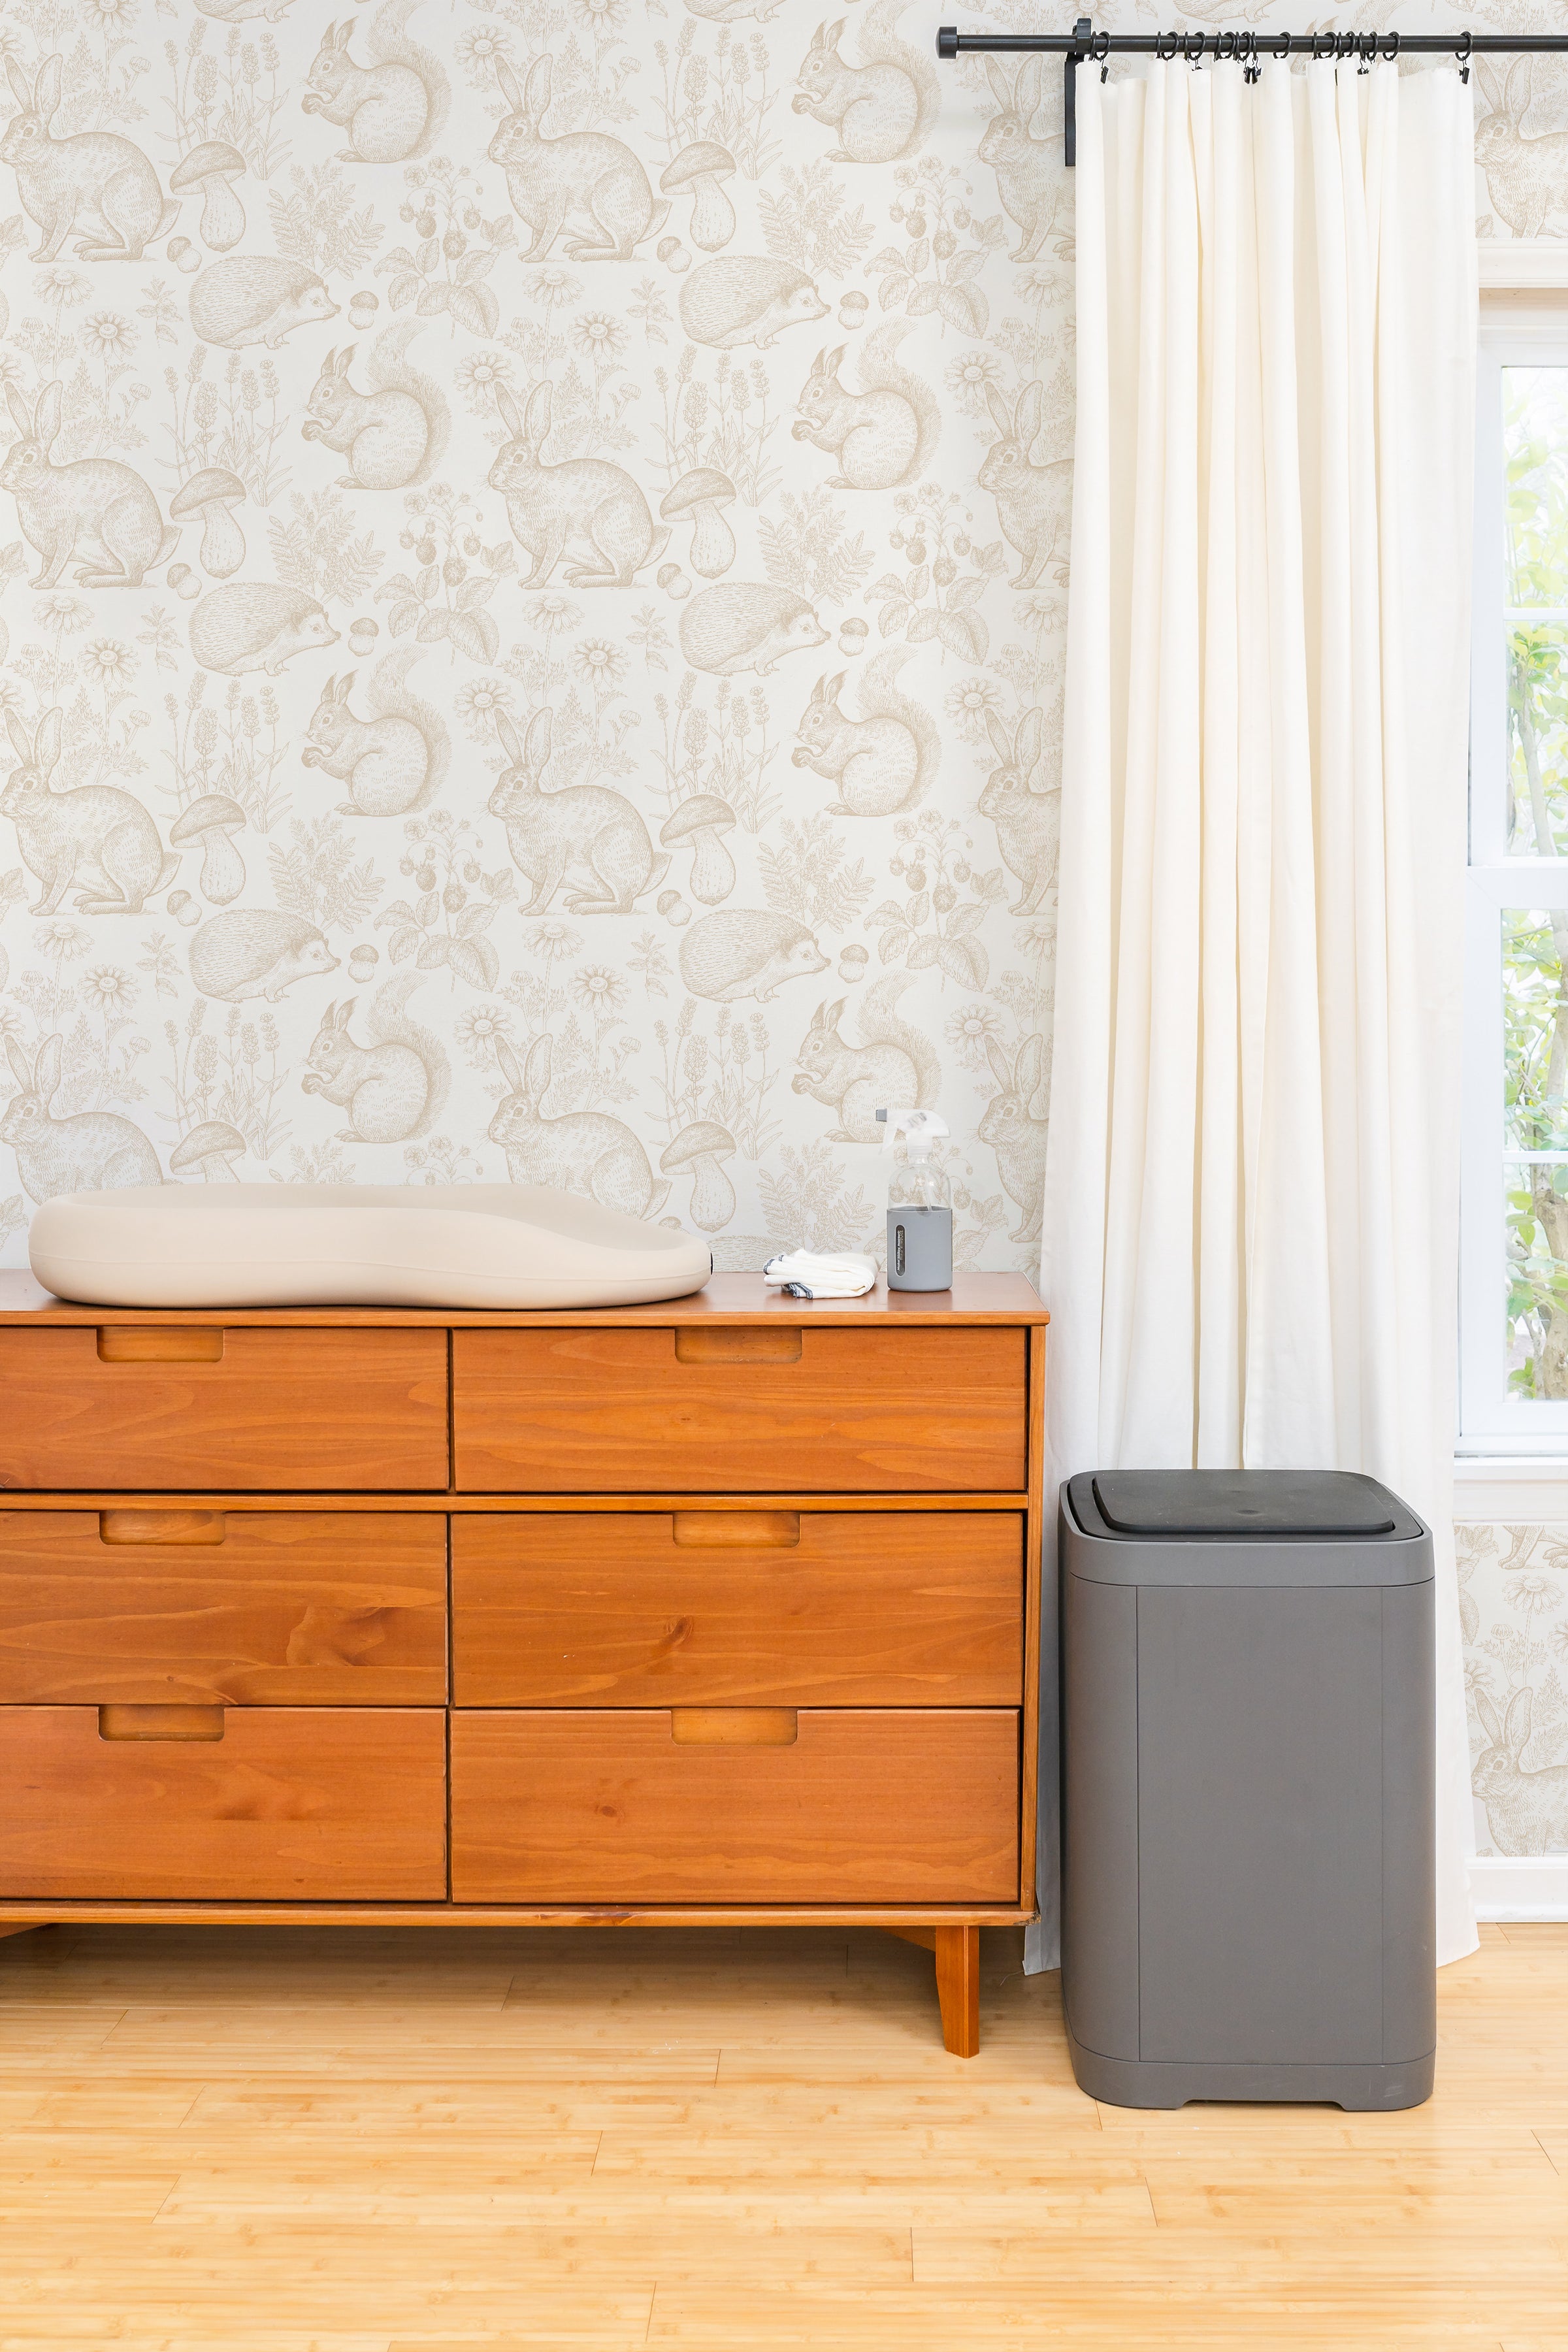 A cozy room corner featuring a mid-century modern wooden dresser against a charming wallpaper adorned with sketched illustrations of woodland creatures like rabbits, squirrels, and hedgehogs amidst flora. A changing pad rests on top of the dresser beside a bottle of lotion and wipes, with a sleek grey diaper pail standing to the side, illustrating a functional and stylish nursery space.